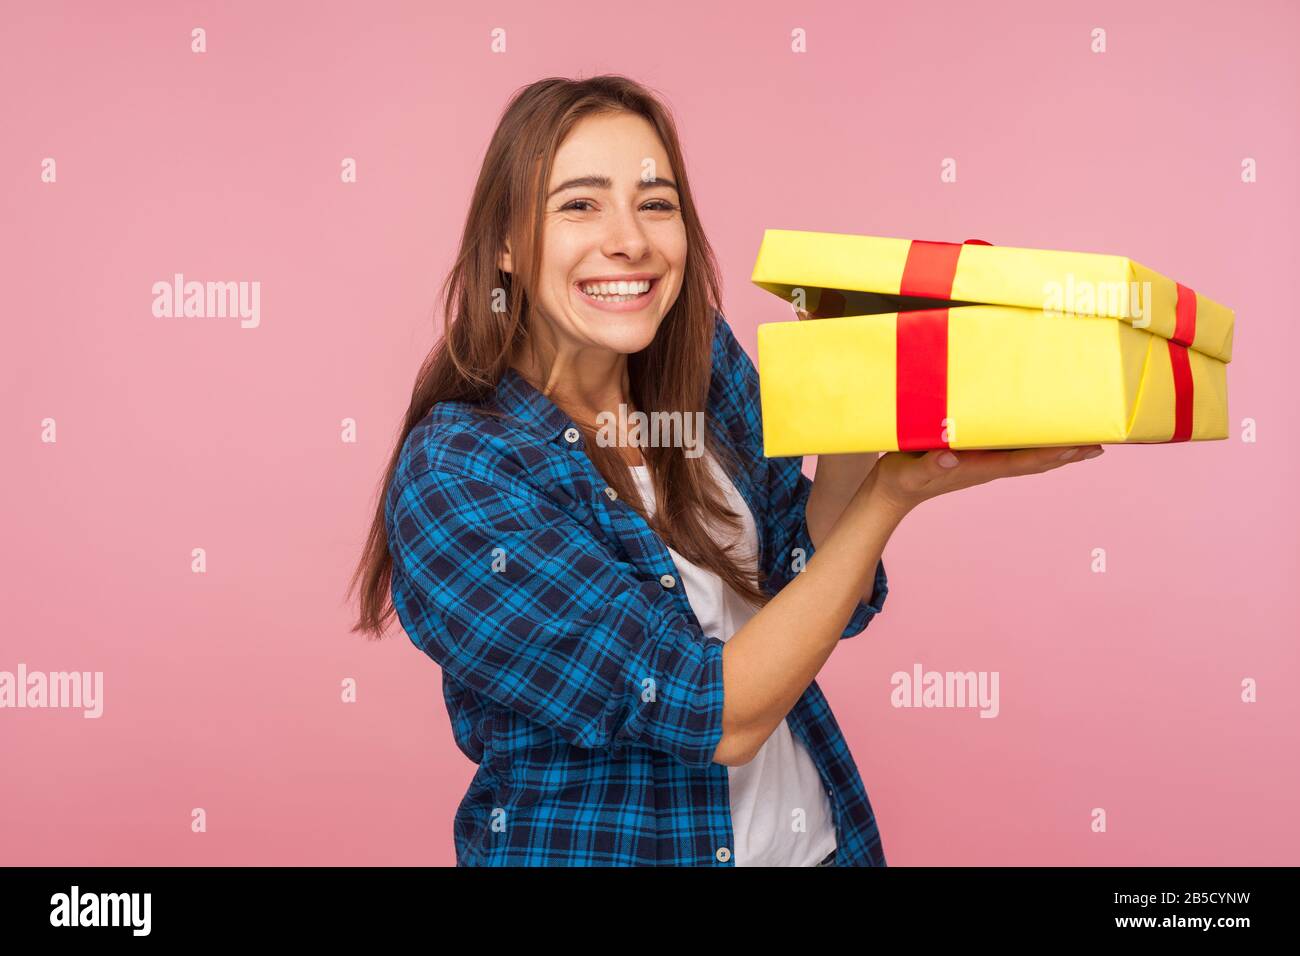 Nice holiday present, bonus! Portrait of happy beautiful girl in checkered shirt holding unwrapped box and looking at camera with toothy smile, excite Stock Photo